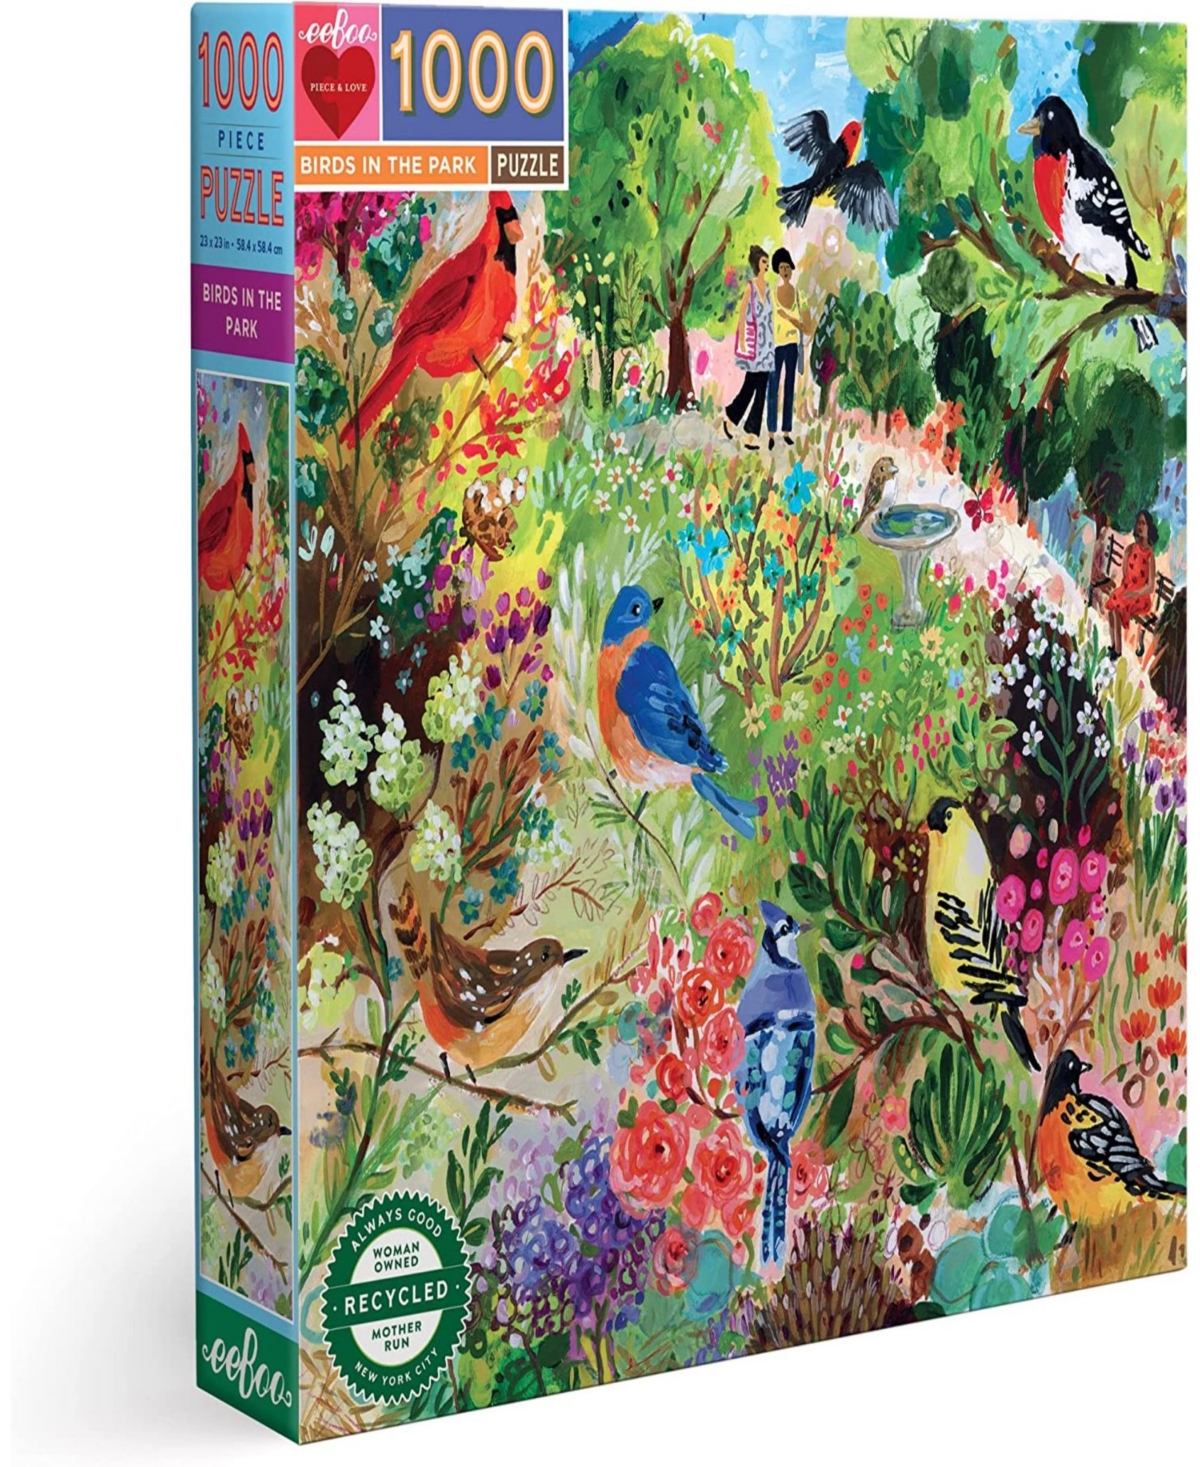 Eeboo Piece And Love Birds In The Park 1000 Piece Adult Square Jigsaw Puzzle In Multi